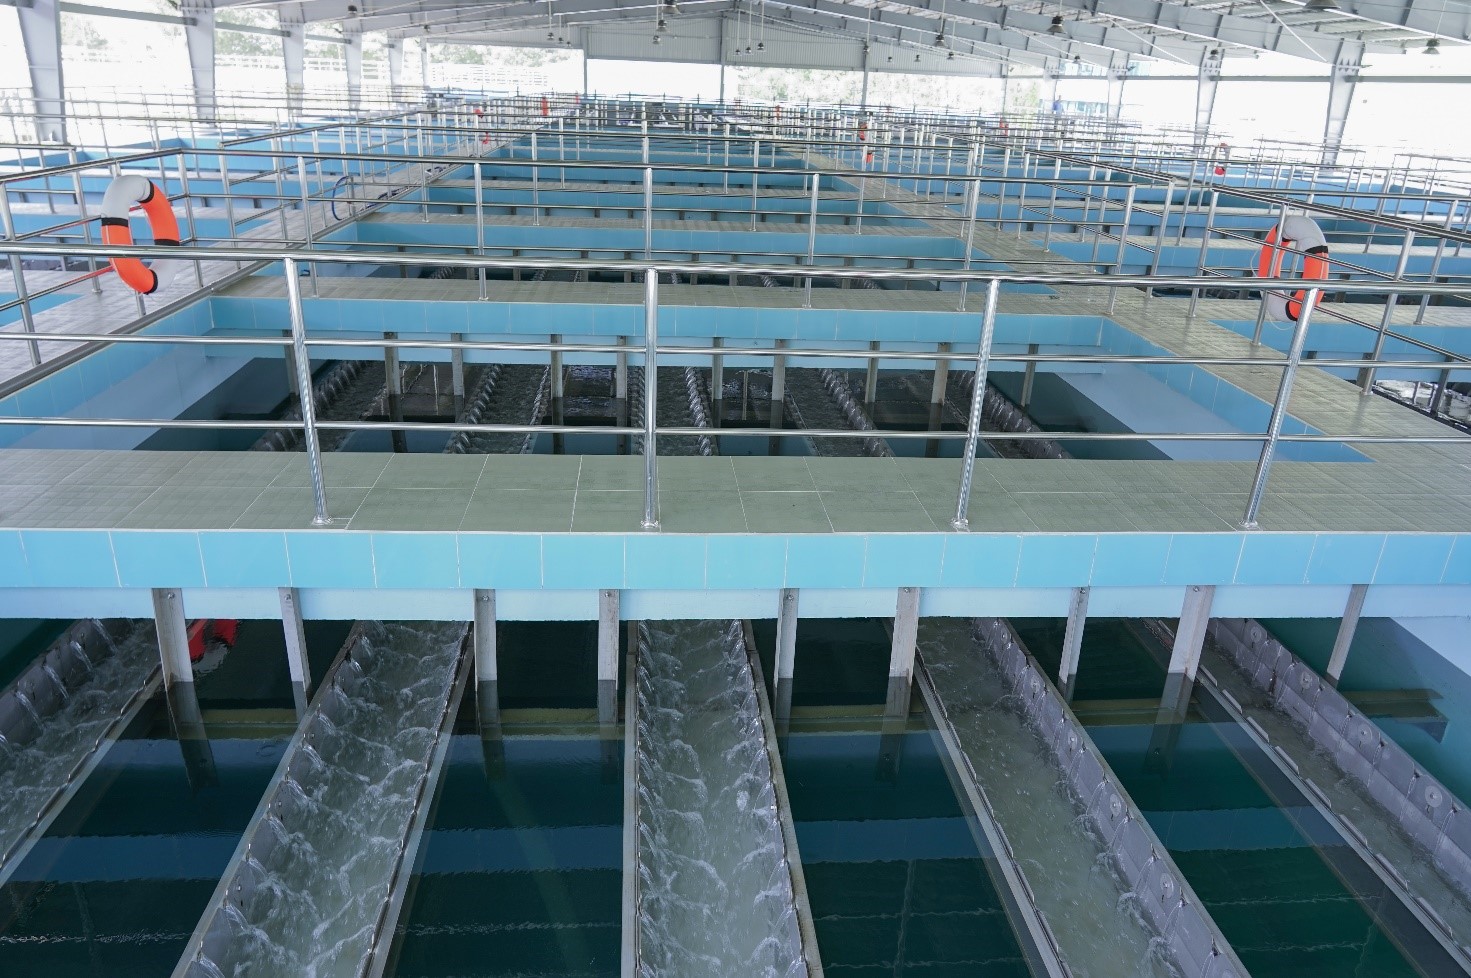 HỆ THỐNG MÁNG THU NƯỚC TRONG SAU LẮNG - ( BỂ LẮNG CÓ MÁI CHE)<br />TROUGH SYSTEM TO COLLECT WATER AFTER SEDIMENTATION (SEDIMENT TANK WITH ROOF COVER)